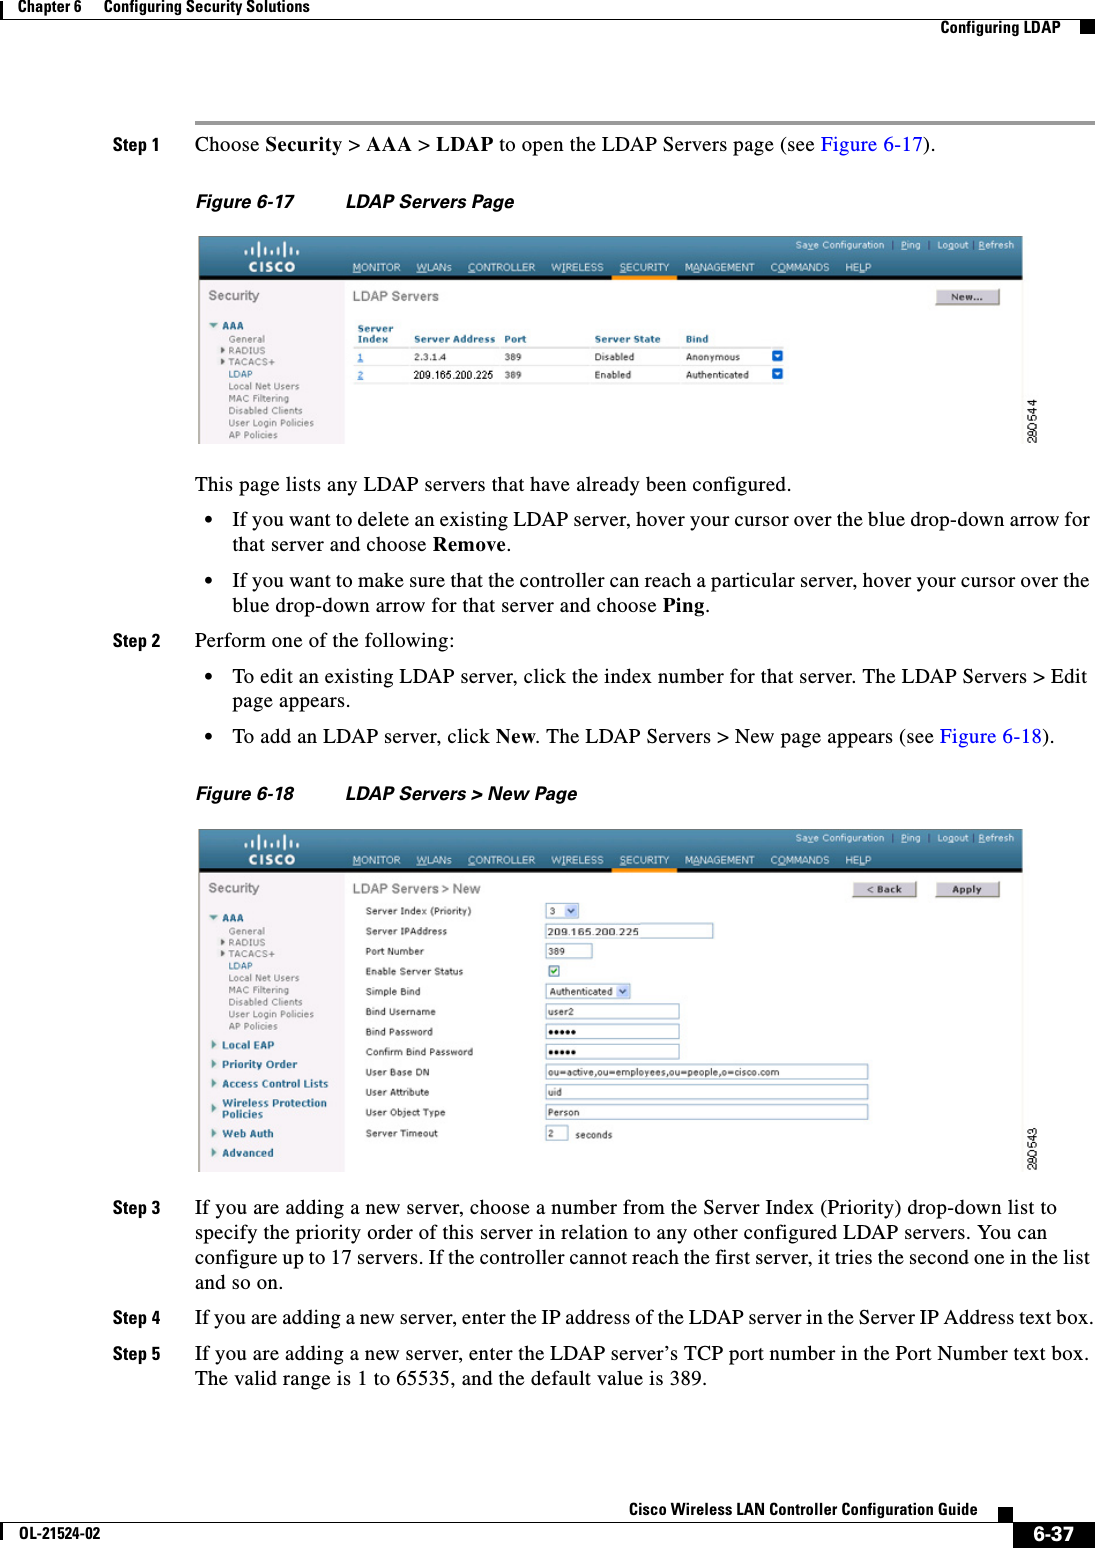  6-37Cisco Wireless LAN Controller Configuration GuideOL-21524-02Chapter 6      Configuring Security Solutions  Configuring LDAPStep 1 Choose Security &gt; AAA &gt; LDAP to open the LDAP Servers page (see Figure 6-17).Figure 6-17 LDAP Servers PageThis page lists any LDAP servers that have already been configured.  • If you want to delete an existing LDAP server, hover your cursor over the blue drop-down arrow for that server and choose Remove.  • If you want to make sure that the controller can reach a particular server, hover your cursor over the blue drop-down arrow for that server and choose Ping.Step 2 Perform one of the following:  • To edit an existing LDAP server, click the index number for that server. The LDAP Servers &gt; Edit page appears.  • To add an LDAP server, click New. The LDAP Servers &gt; New page appears (see Figure 6-18).Figure 6-18 LDAP Servers &gt; New PageStep 3 If you are adding a new server, choose a number from the Server Index (Priority) drop-down list to specify the priority order of this server in relation to any other configured LDAP servers. You can configure up to 17 servers. If the controller cannot reach the first server, it tries the second one in the list and so on.Step 4 If you are adding a new server, enter the IP address of the LDAP server in the Server IP Address text box.Step 5 If you are adding a new server, enter the LDAP server’s TCP port number in the Port Number text box. The valid range is 1 to 65535, and the default value is 389.